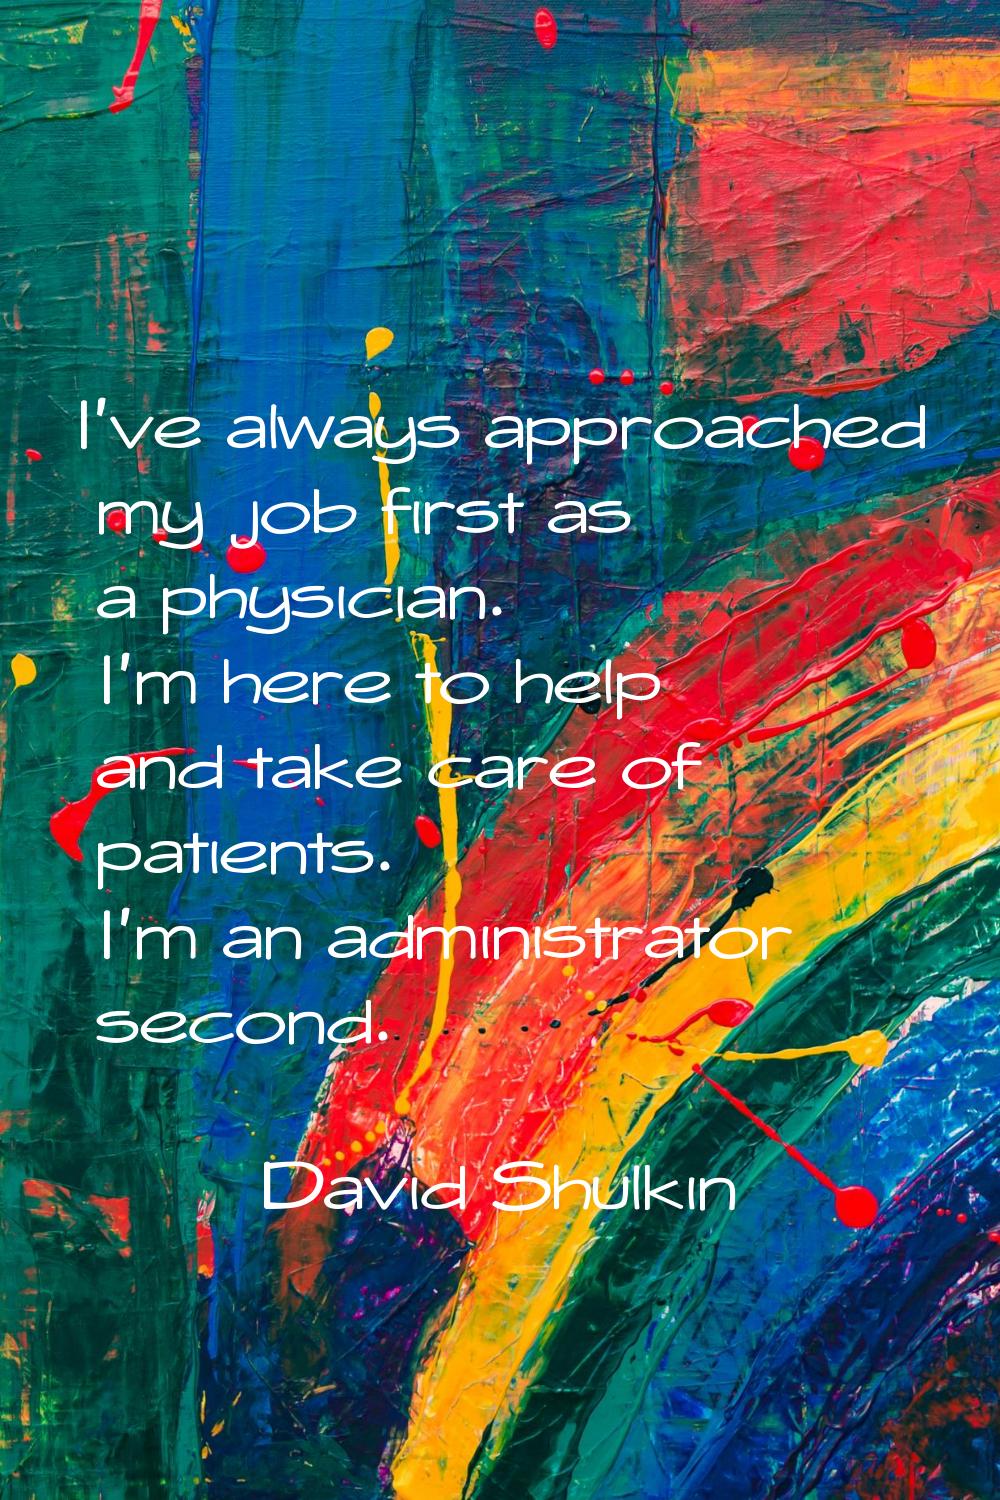 I've always approached my job first as a physician. I'm here to help and take care of patients. I'm